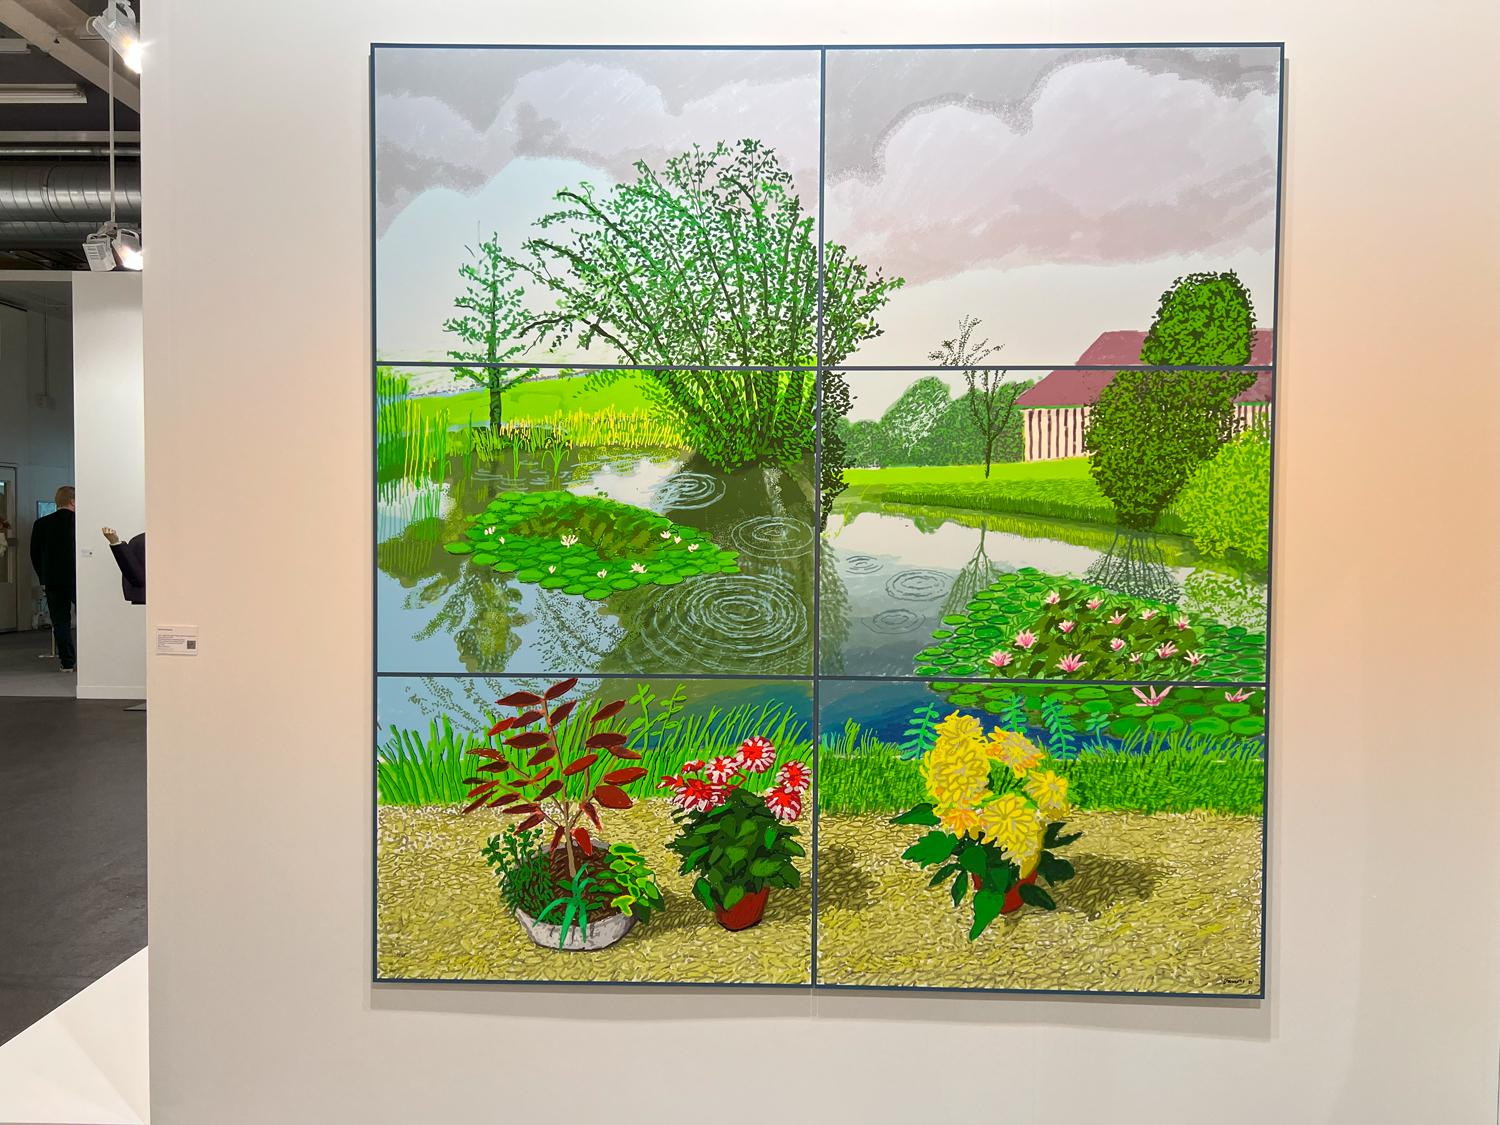 David Hockney. 10th - 22th June 2021, Water Lilies in the Pond with Pots of Flowers, 2021. &pound;650 тыс. Annely Juda Fine Art